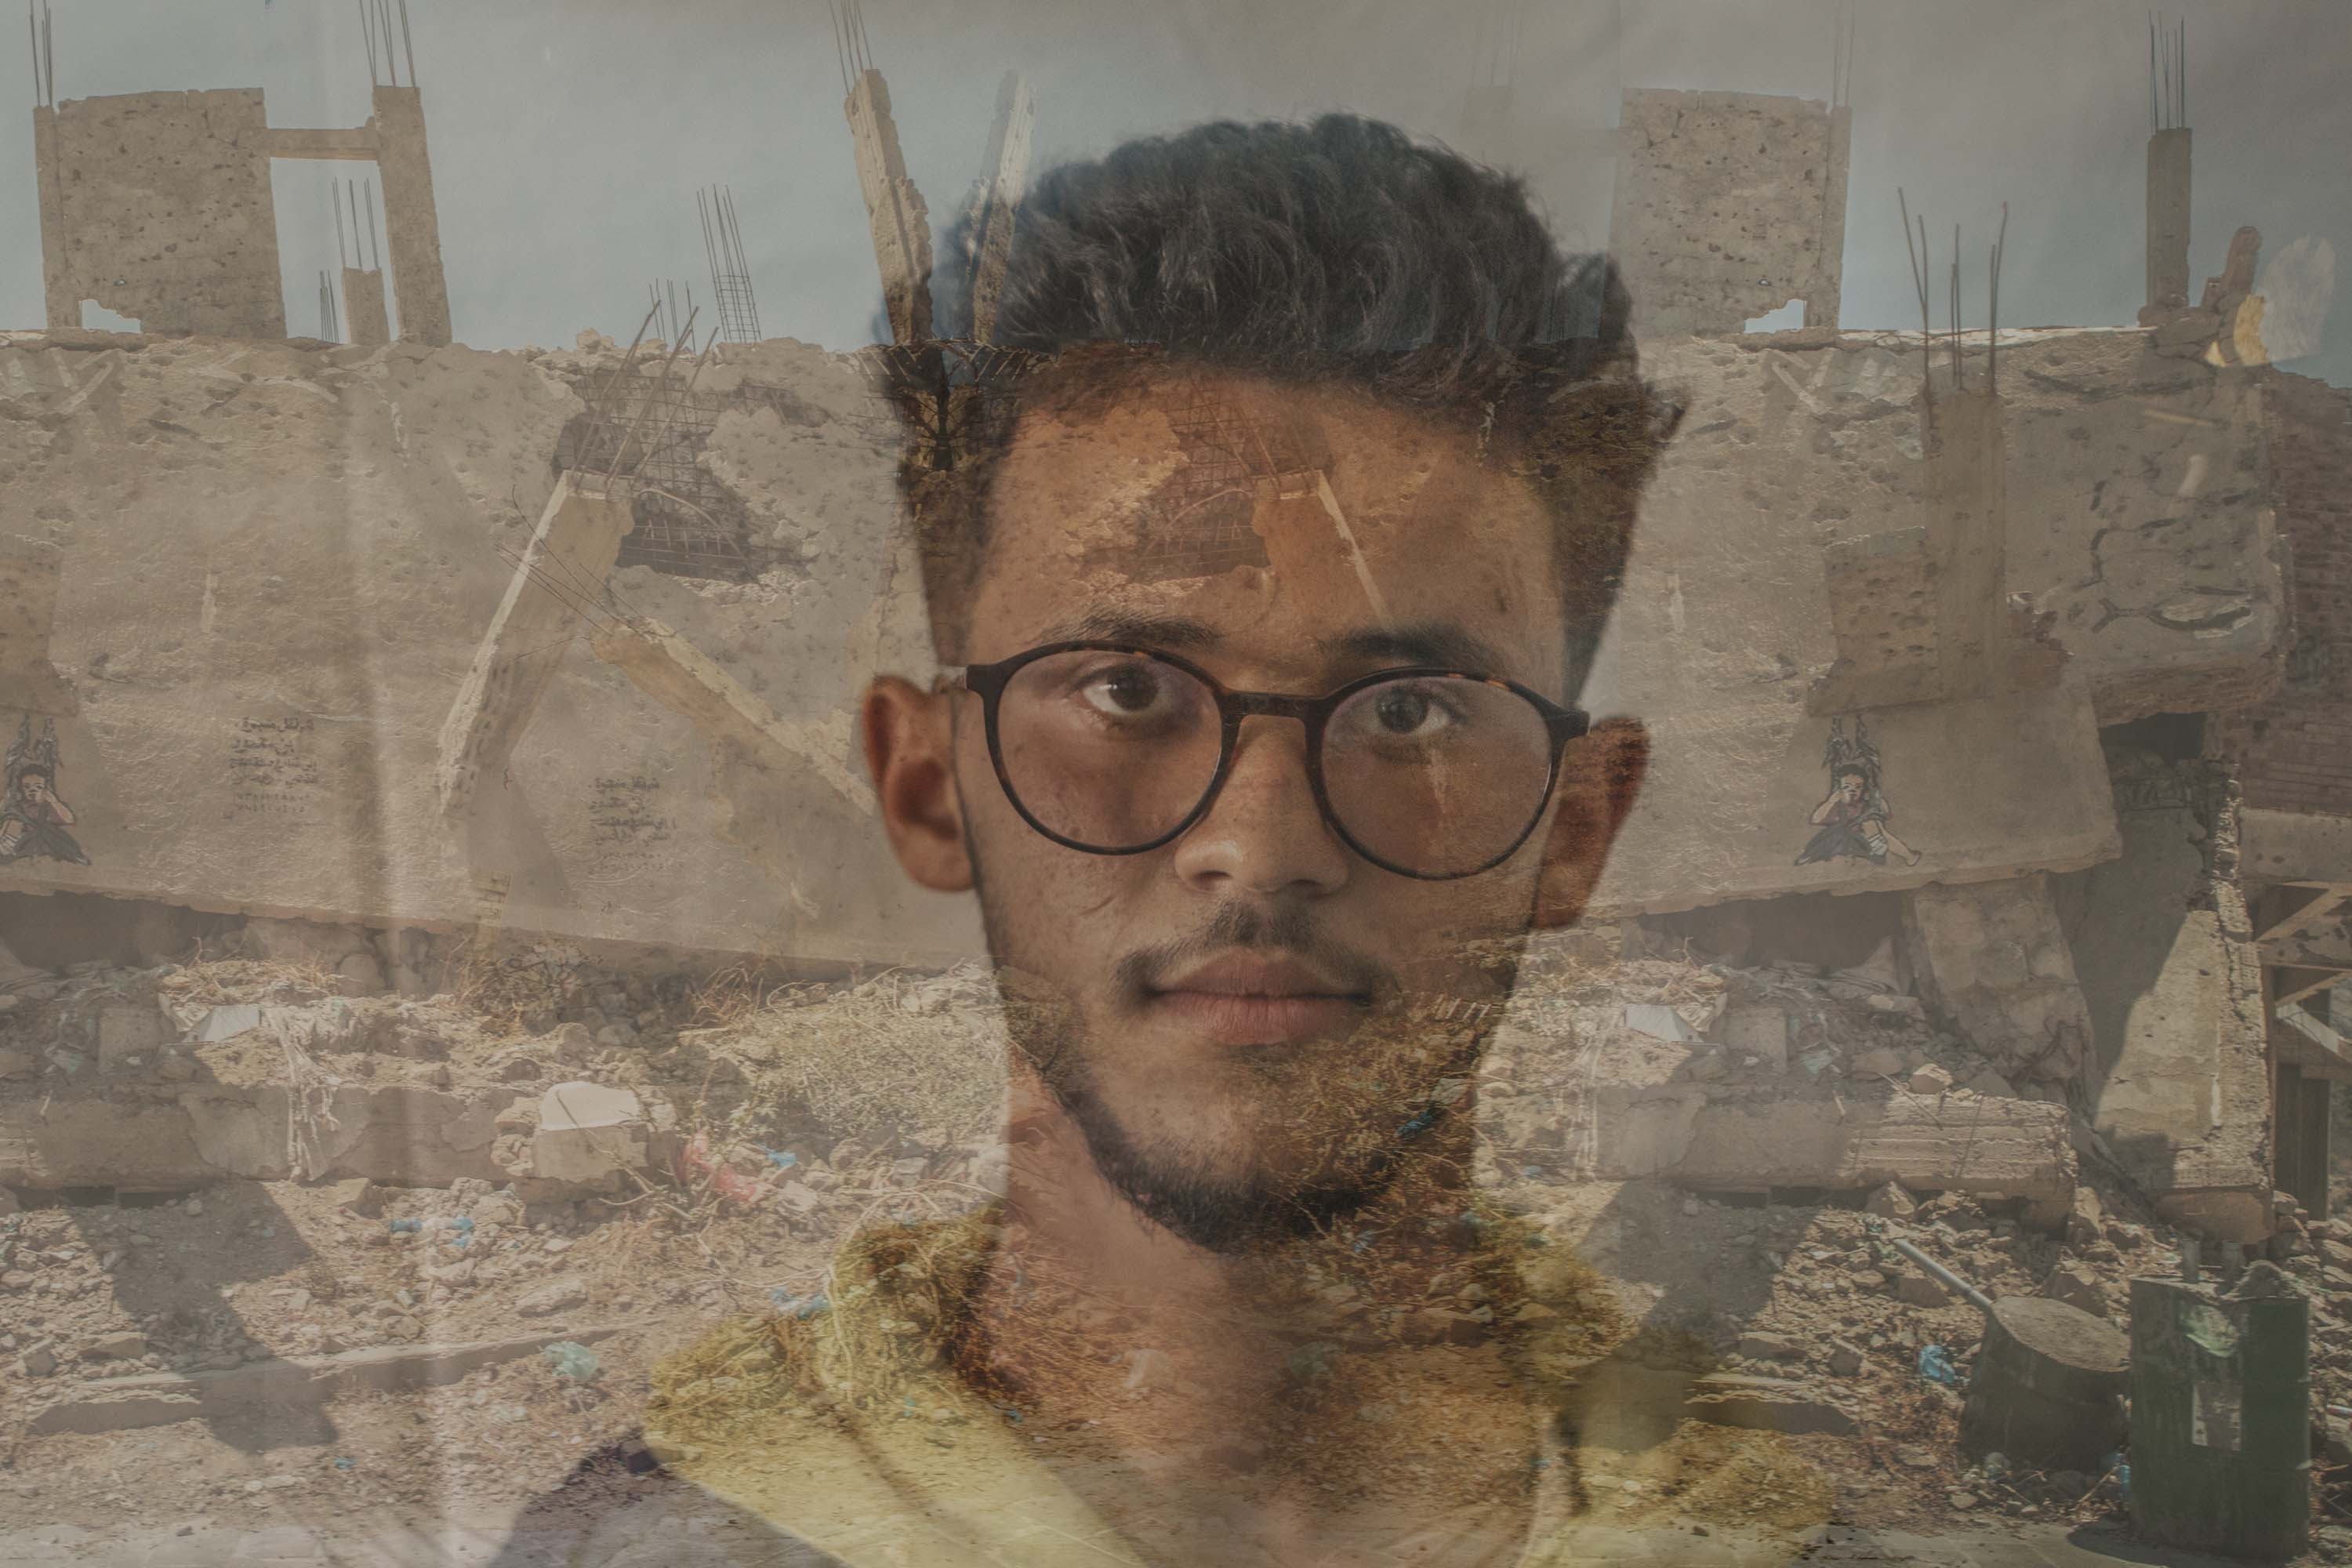 Yemen, a 15 yr. boy in glasses, stands in front of the rubble of a building